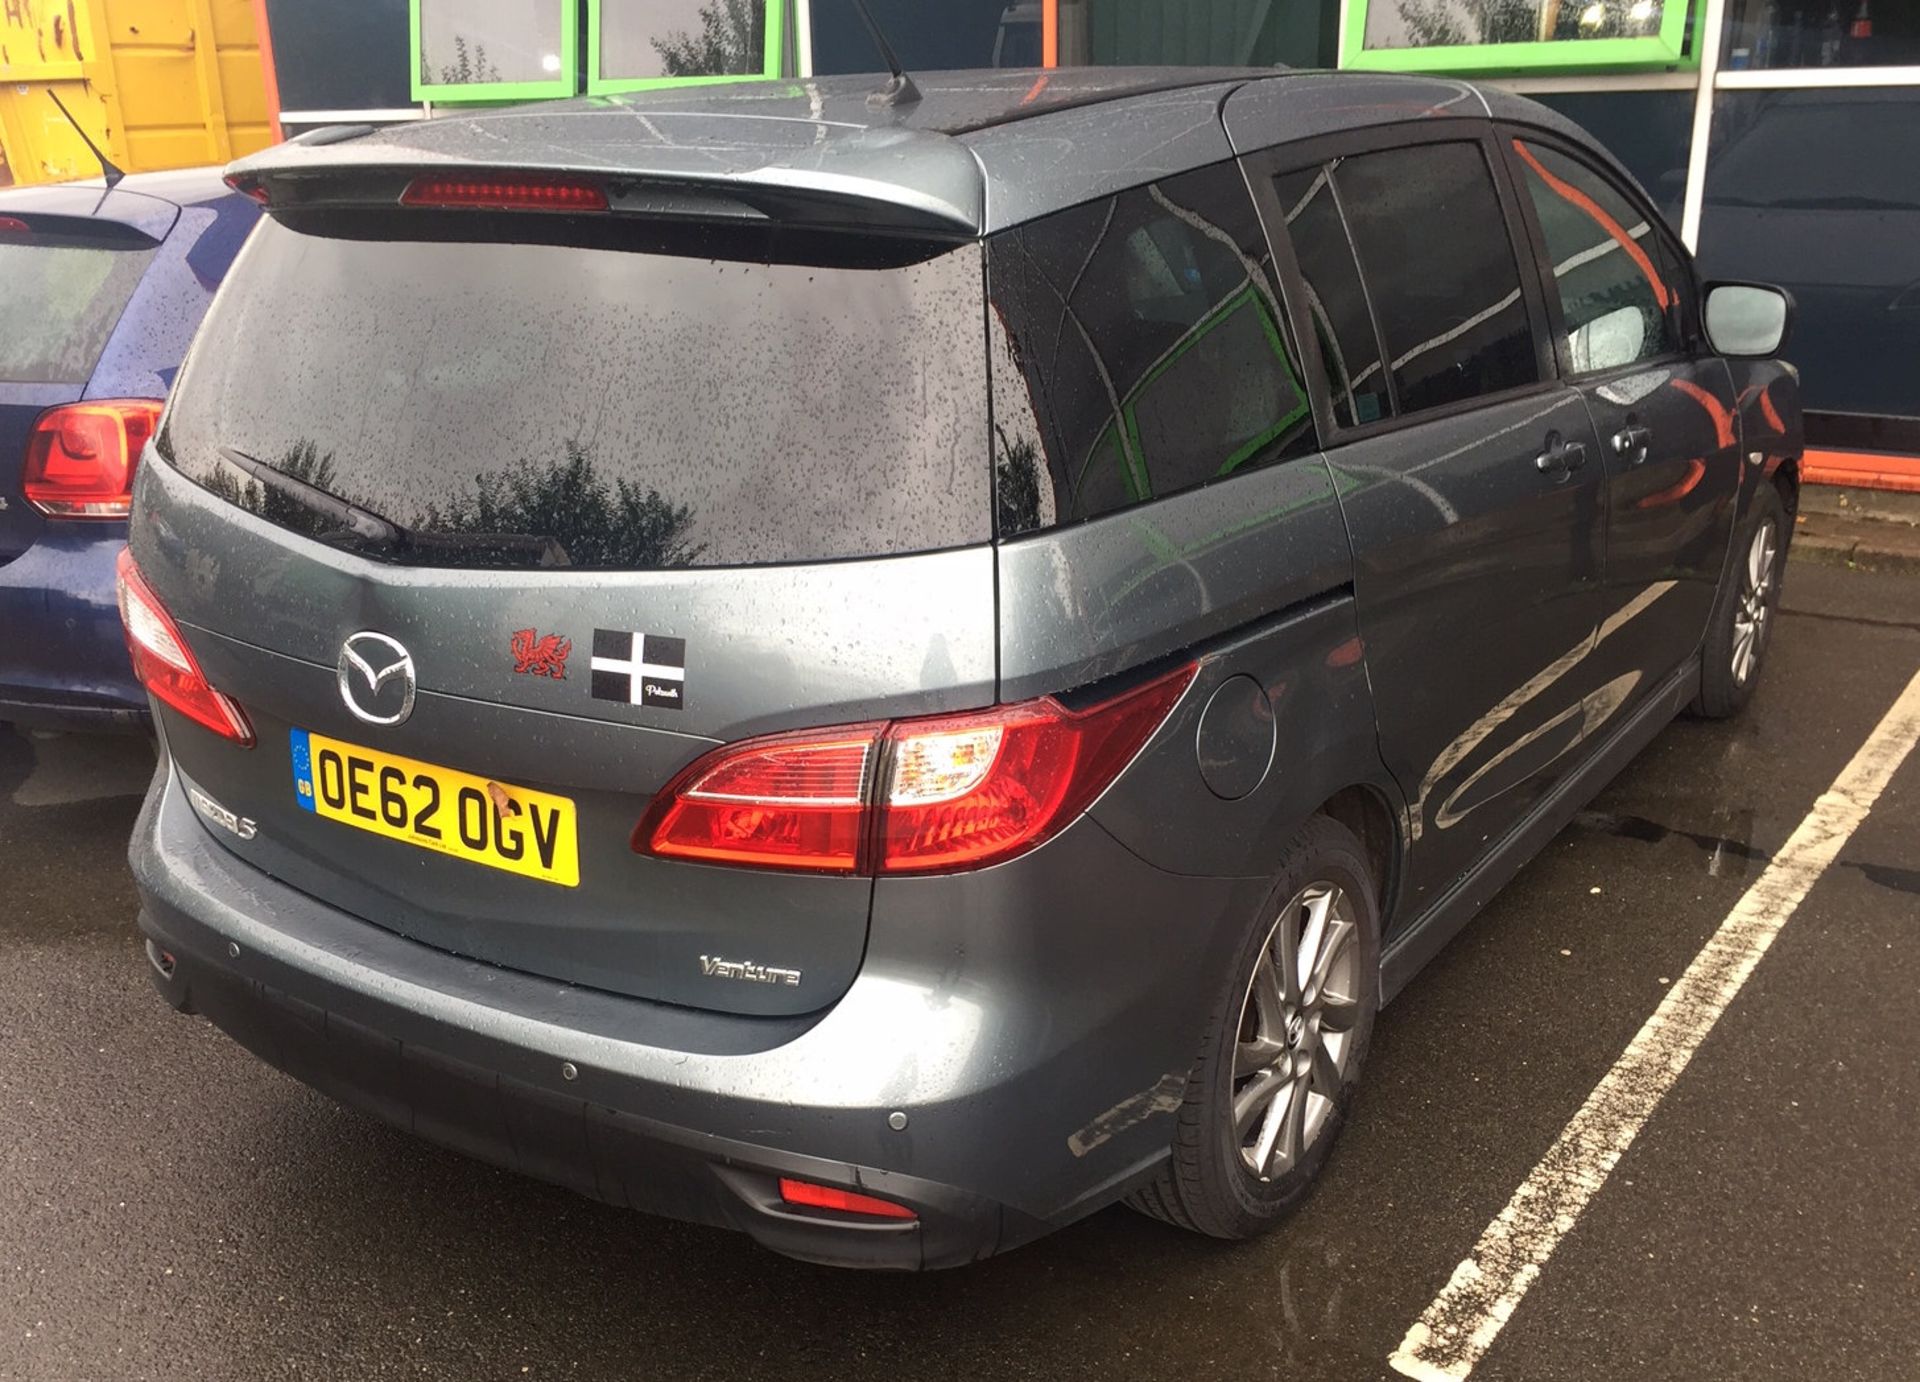 2013 Mazda 5 2.0 Venture Edition 5 Dr MPV - CL505 - NO VAT ON THE HAMMER - Location: Corby, N - Image 12 of 18